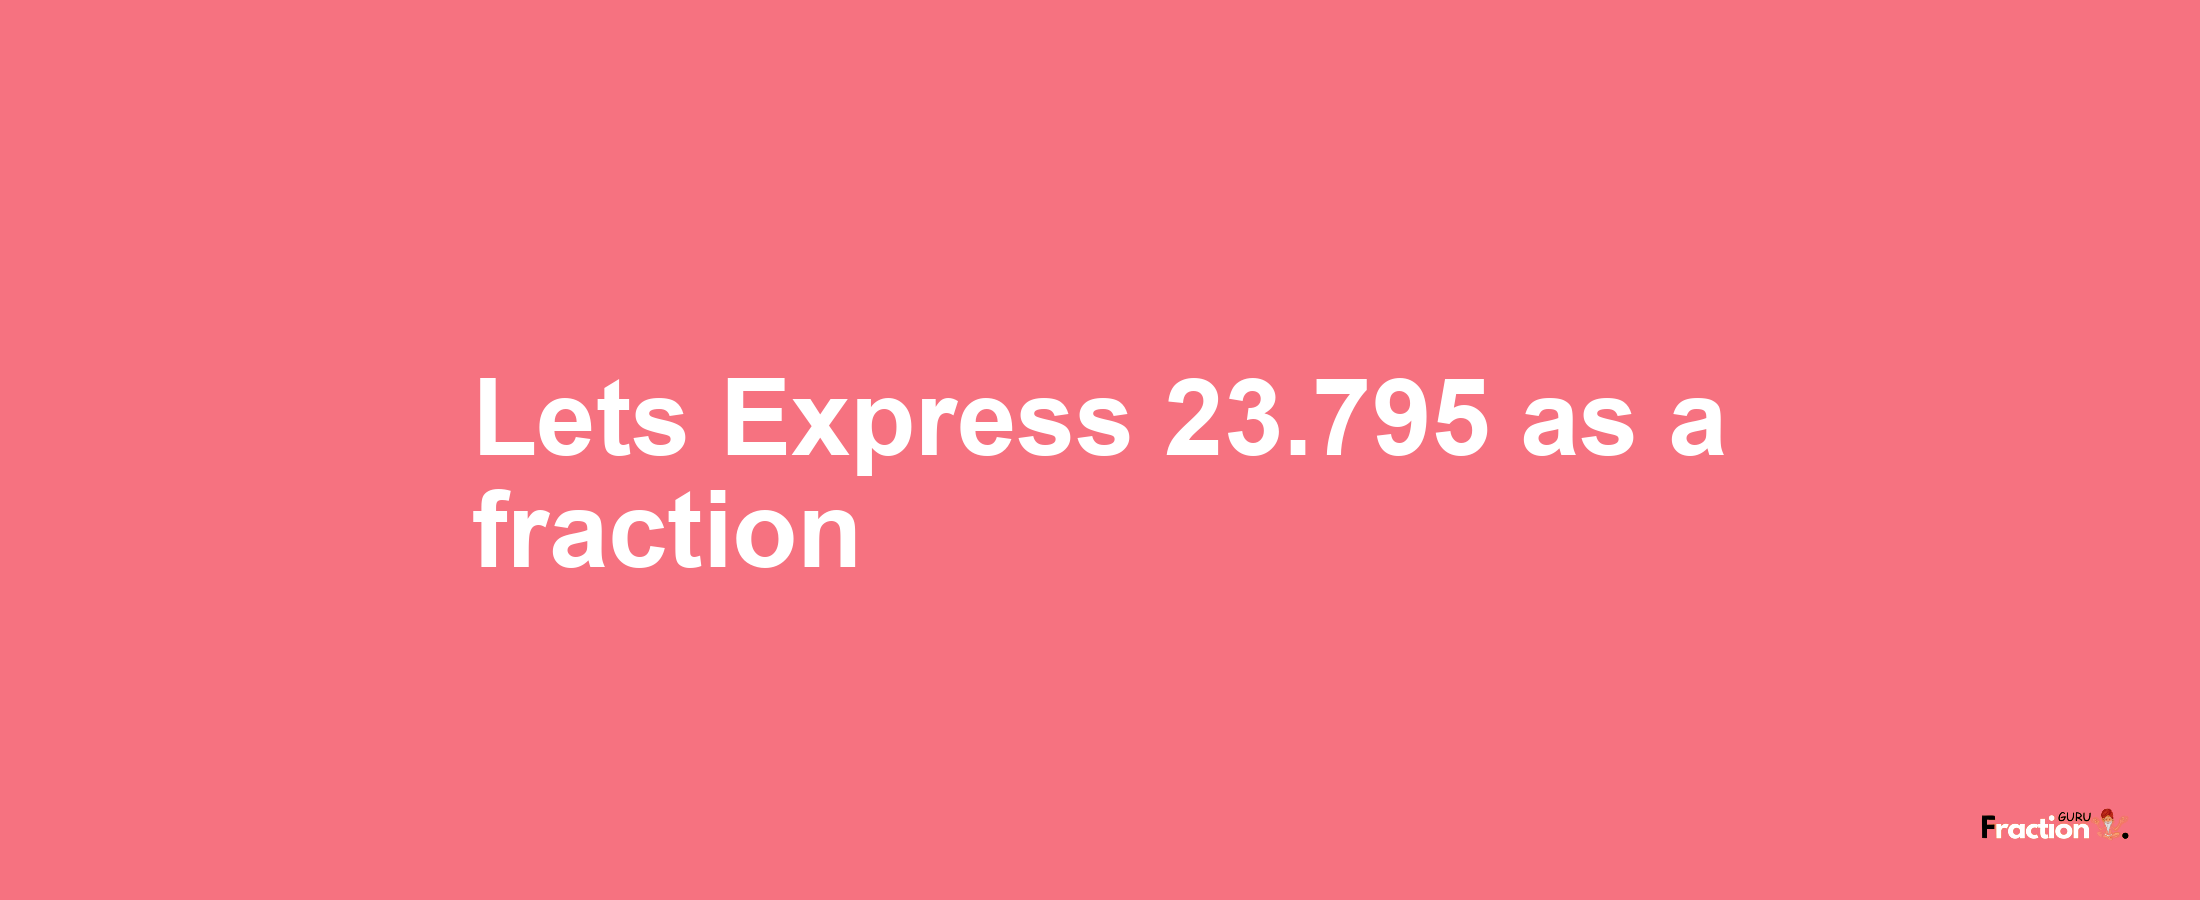 Lets Express 23.795 as afraction